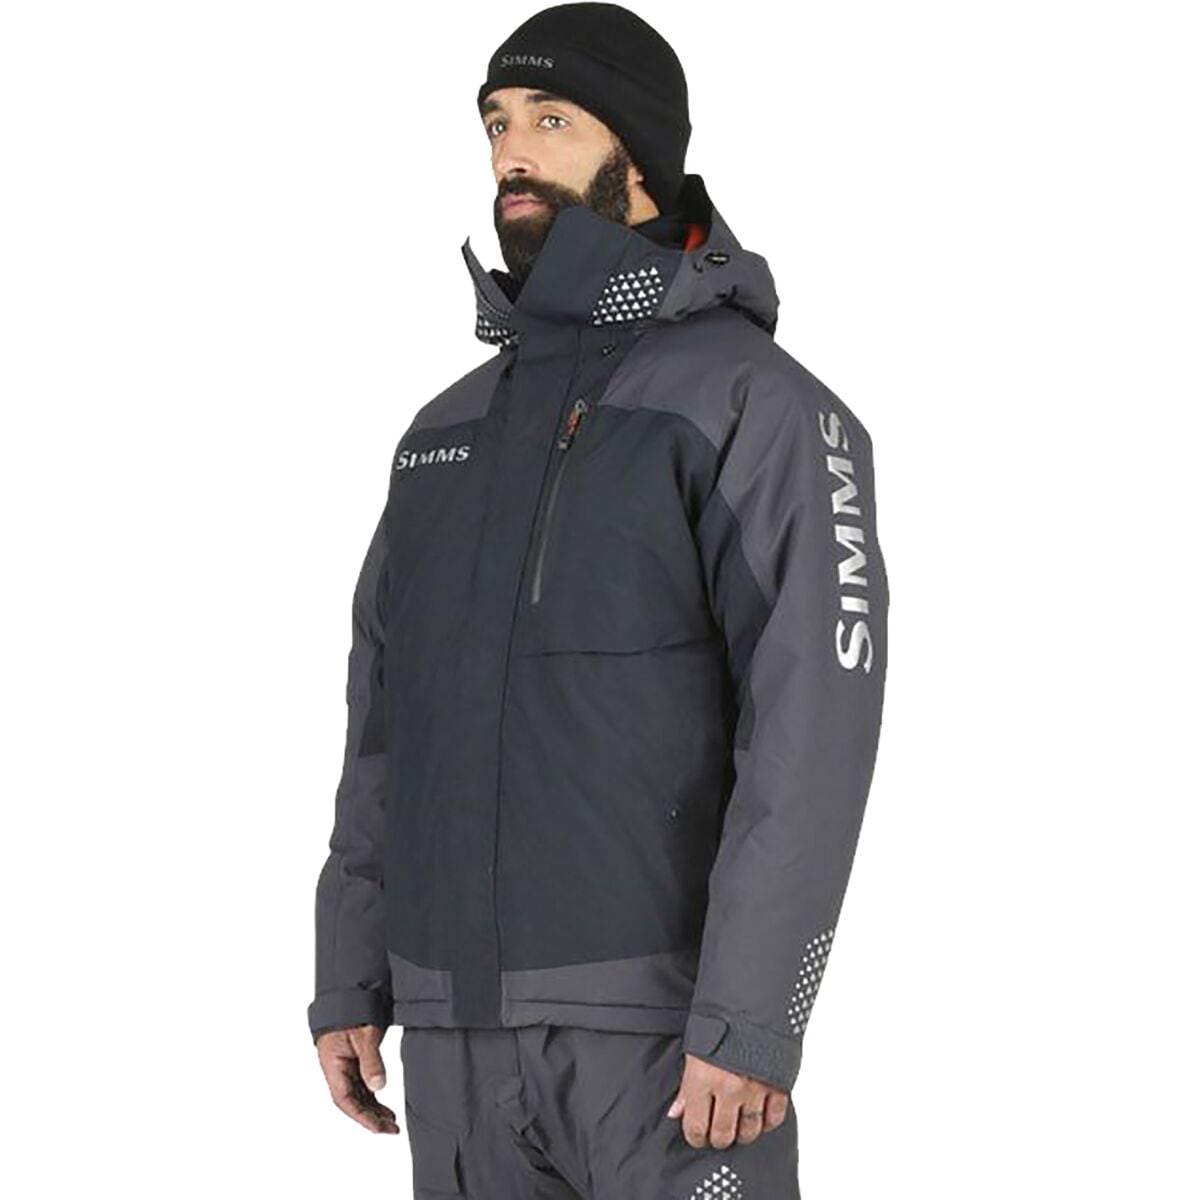 Simms Challenger Insulated Jacket - Men's - Clothing